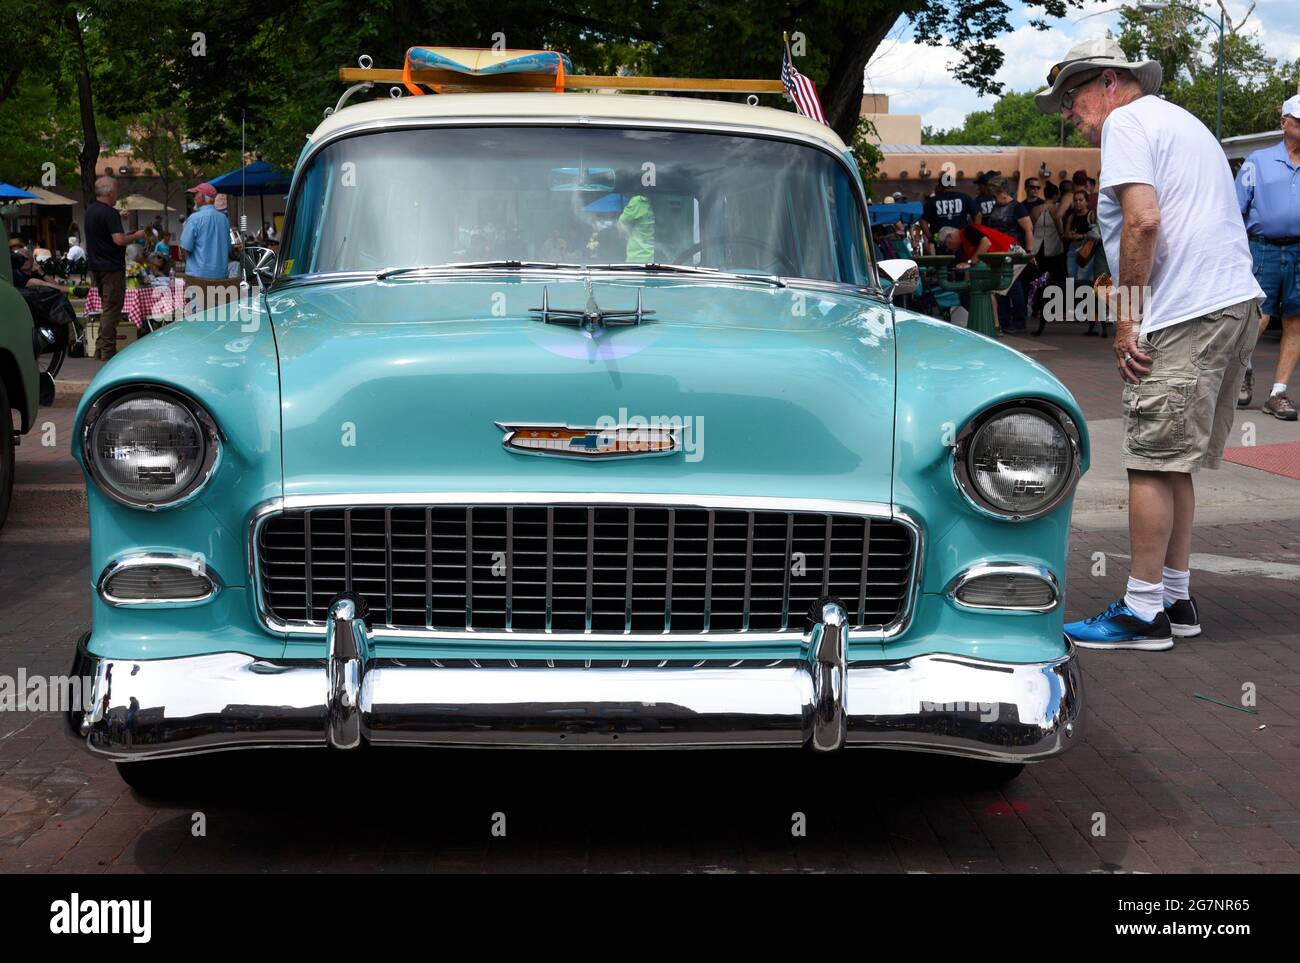 A 1956 Chevrolet station wagon on display at a Fourth of July car show in Santa Fe, New Mexico. Stock Photo